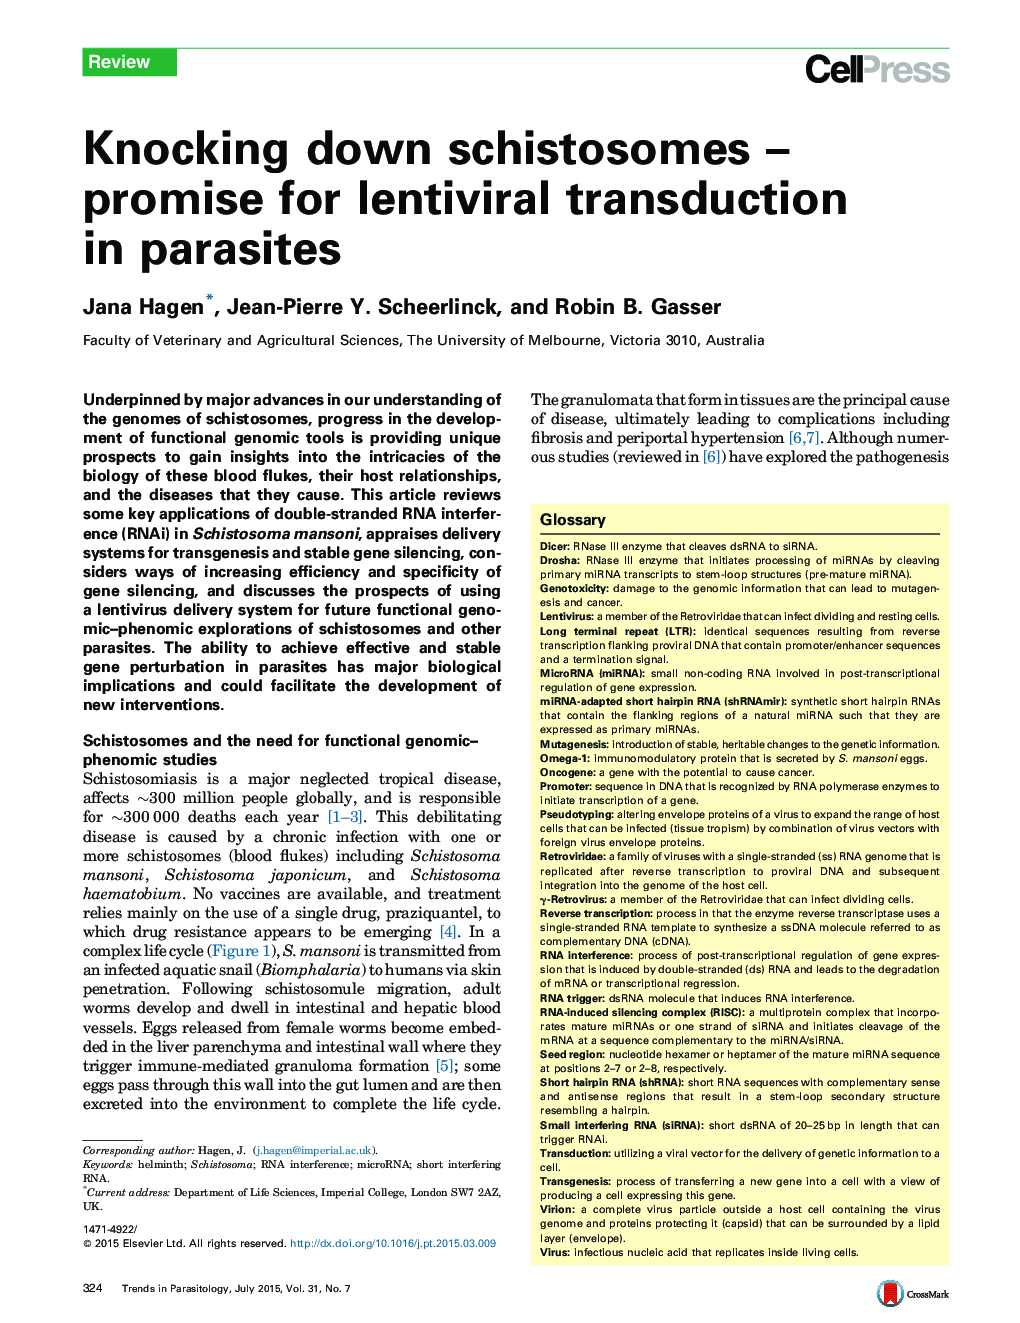 Knocking down schistosomes – promise for lentiviral transduction in parasites